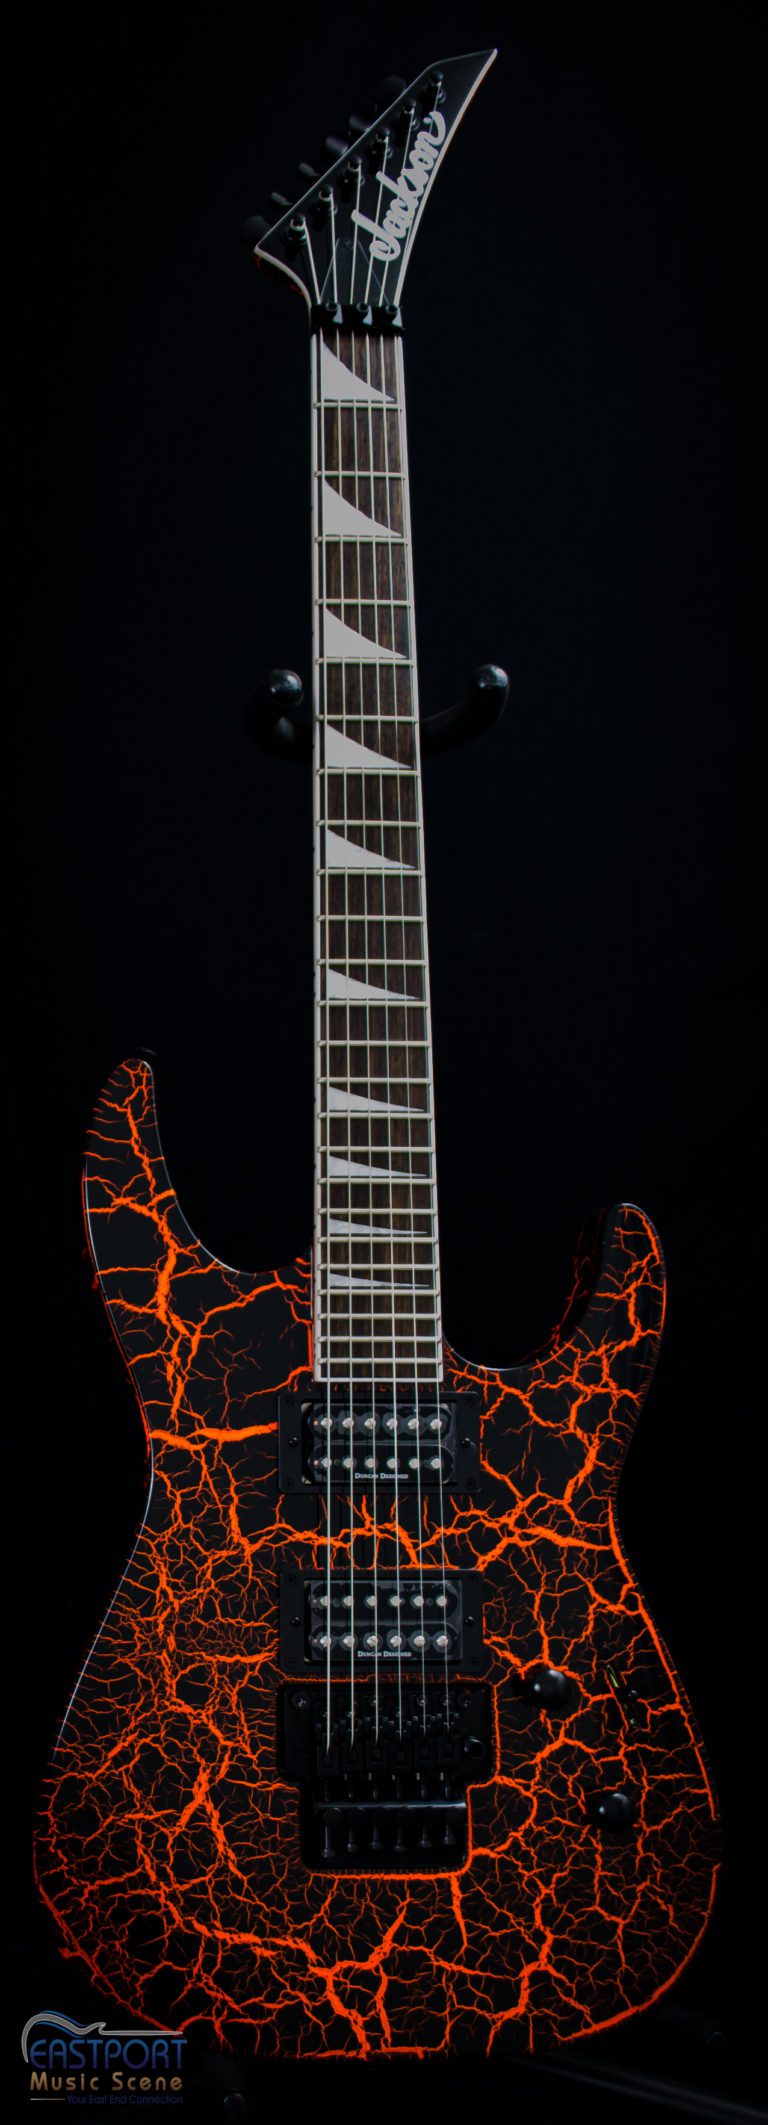 A guitar with some orange and black flames on it